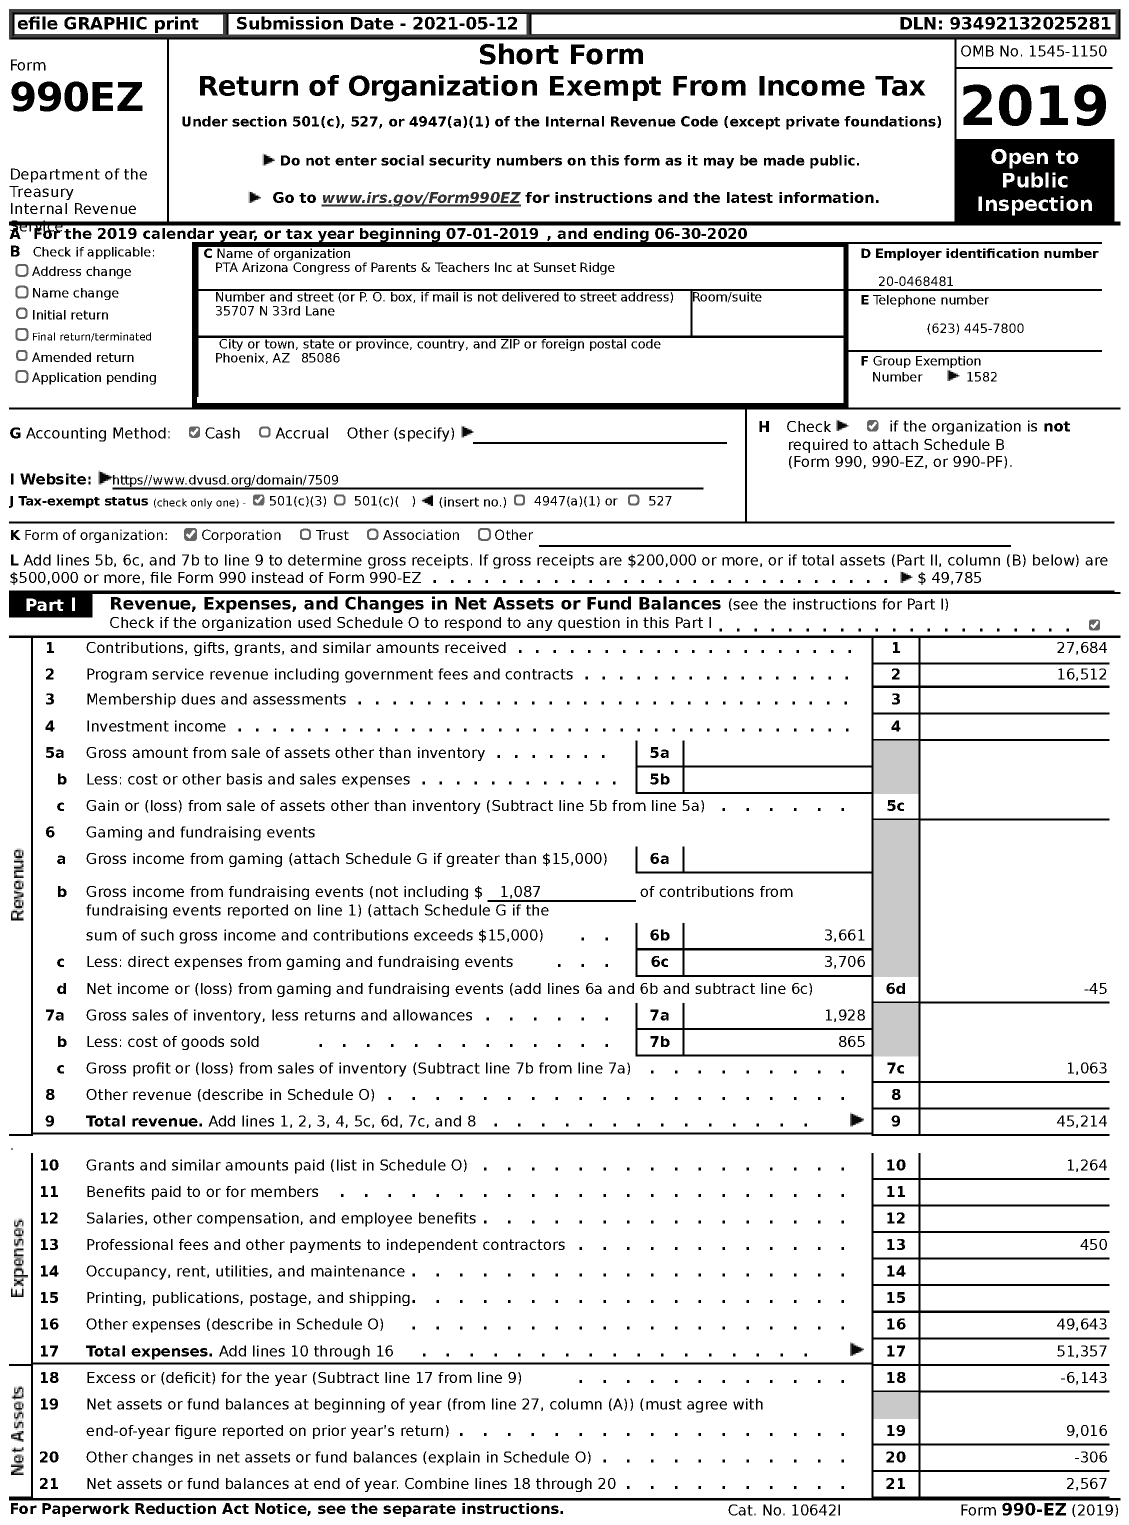 Image of first page of 2019 Form 990EZ for PTA Arizona Congress of Parents and Teachers / Sunset Ridge PTA